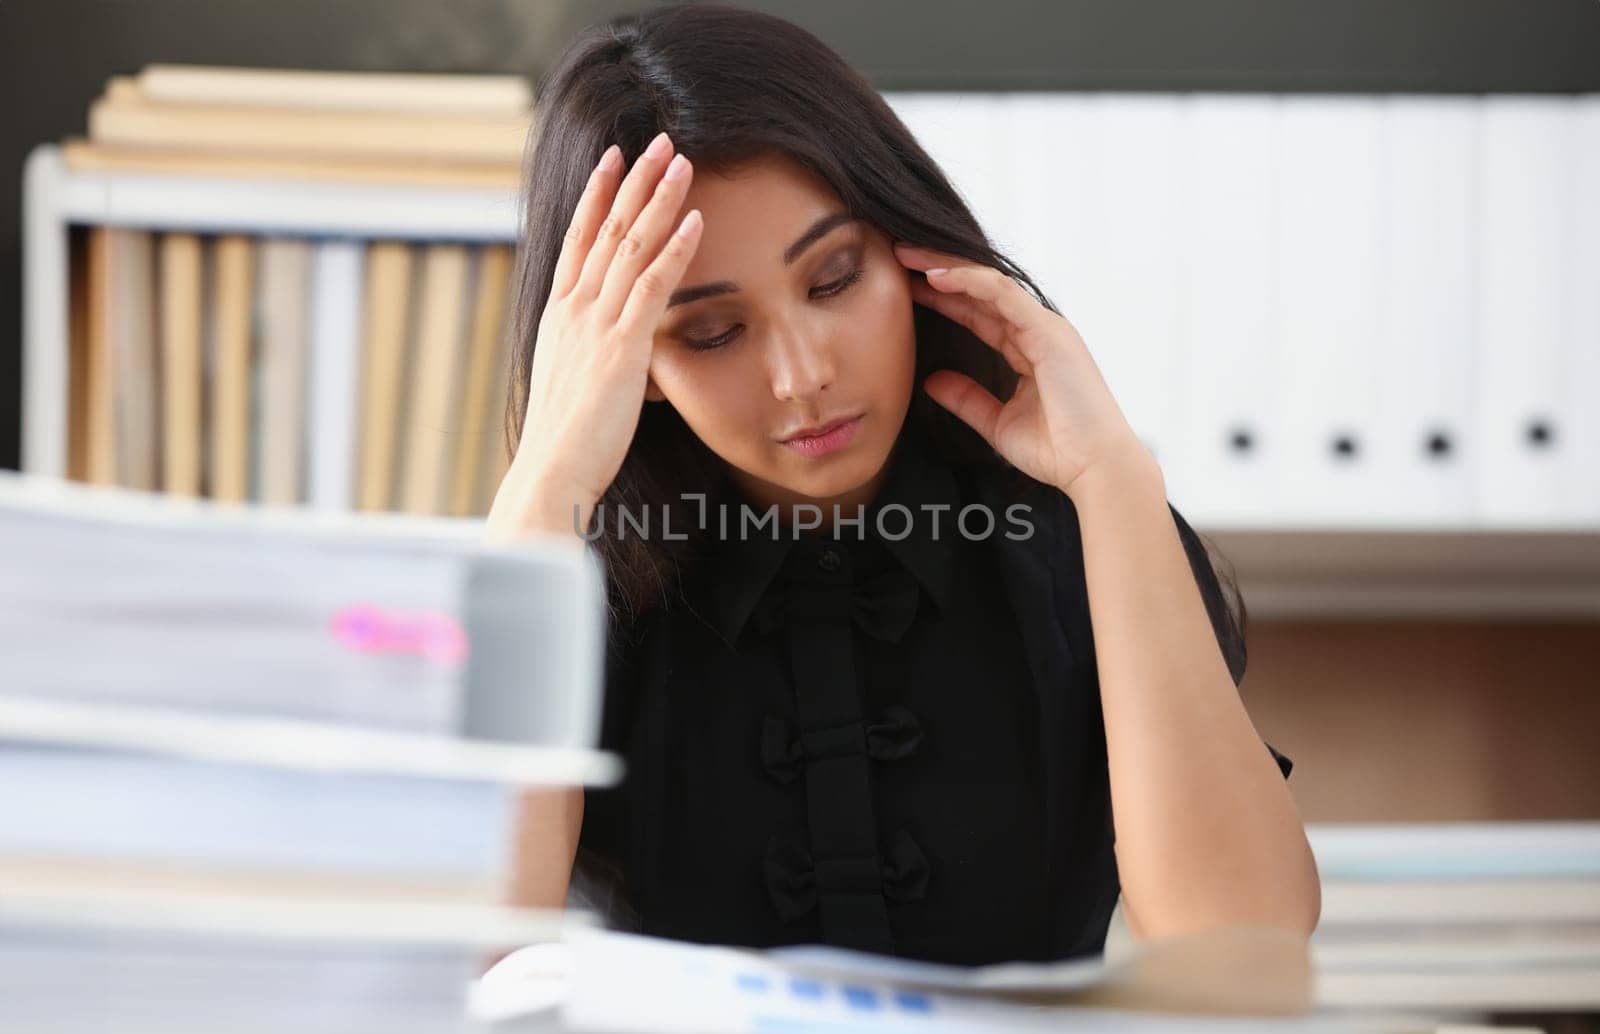 Tired and exhausted chinese woman looks at documents propping up her head with her hands. Huge pile of document folders, headache and depression concept